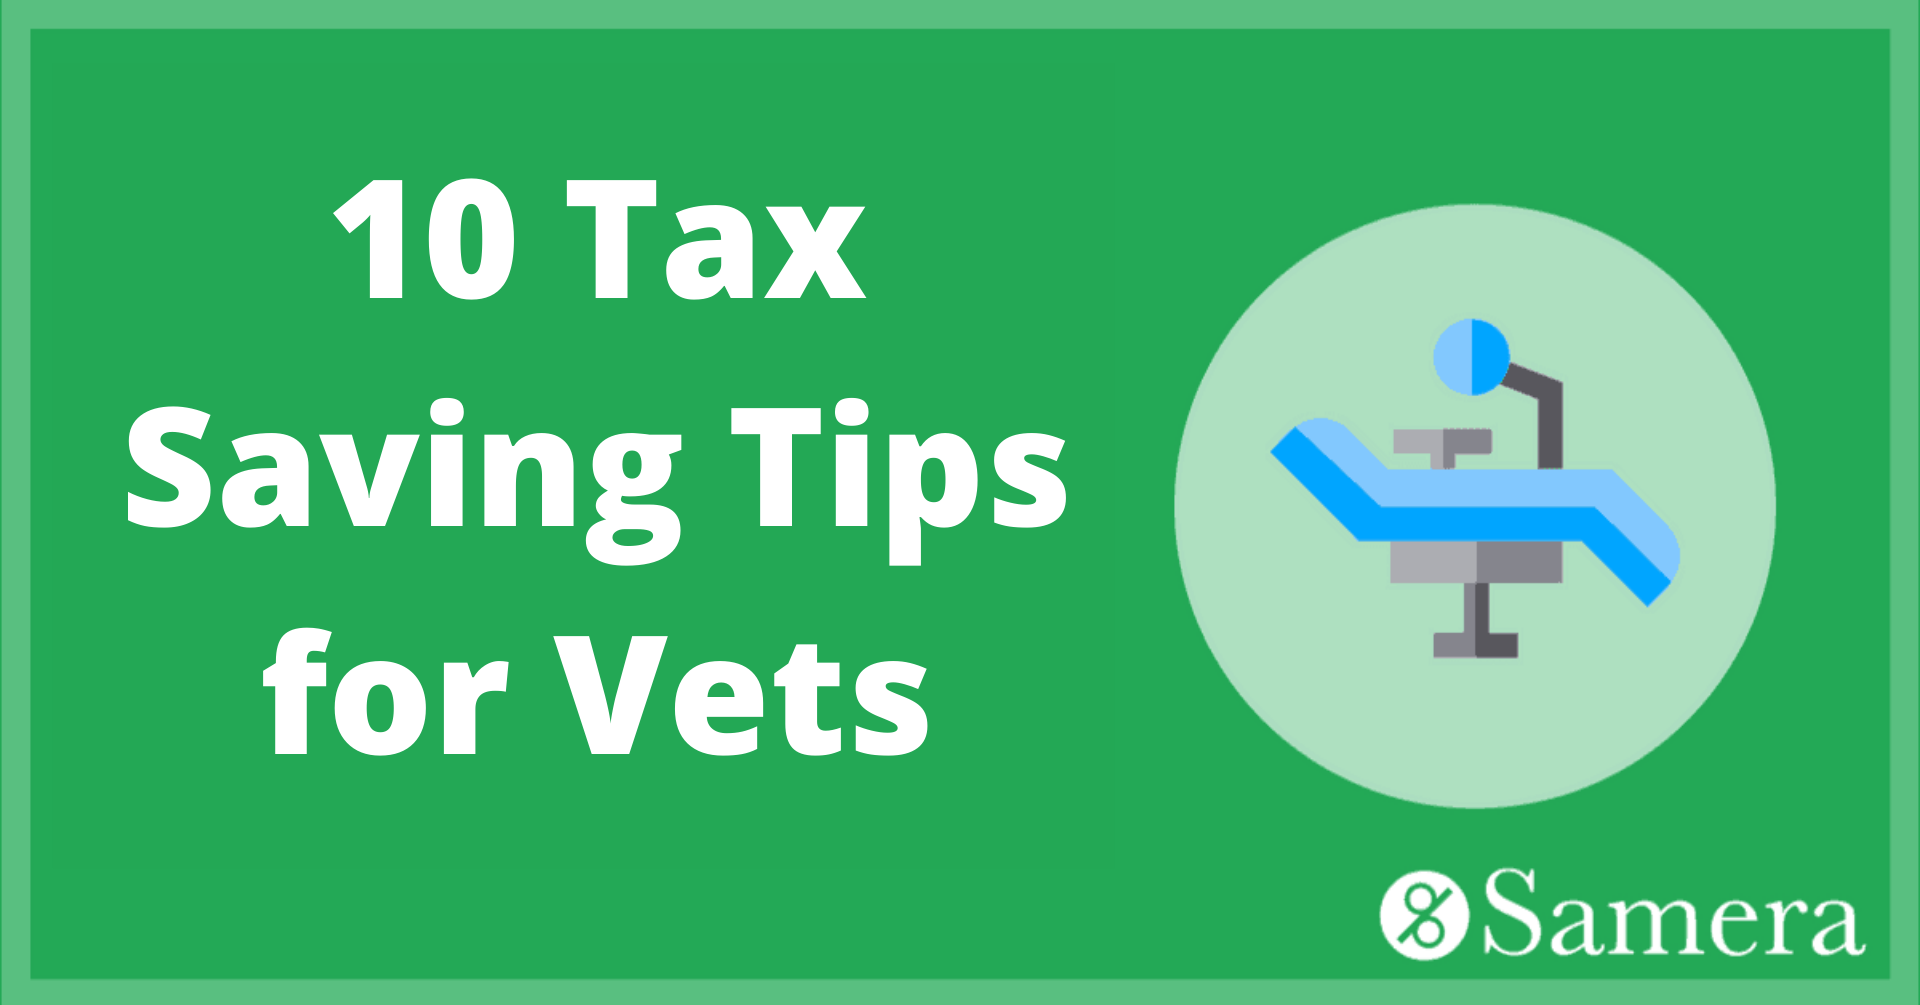 10 Tax Saving Tips for Vets